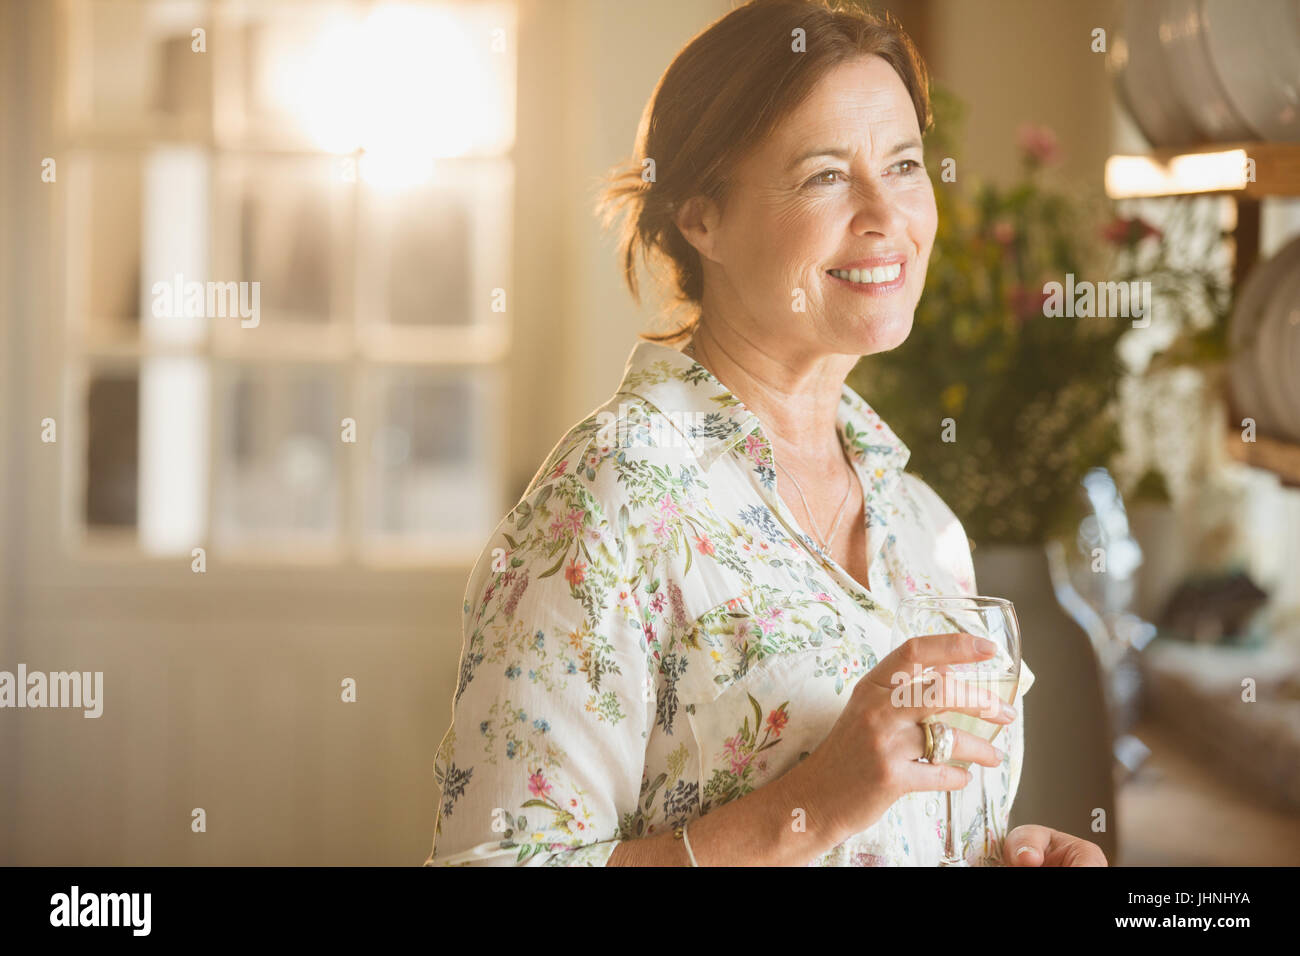 Smiling mature woman drinking wine in kitchen Stock Photo